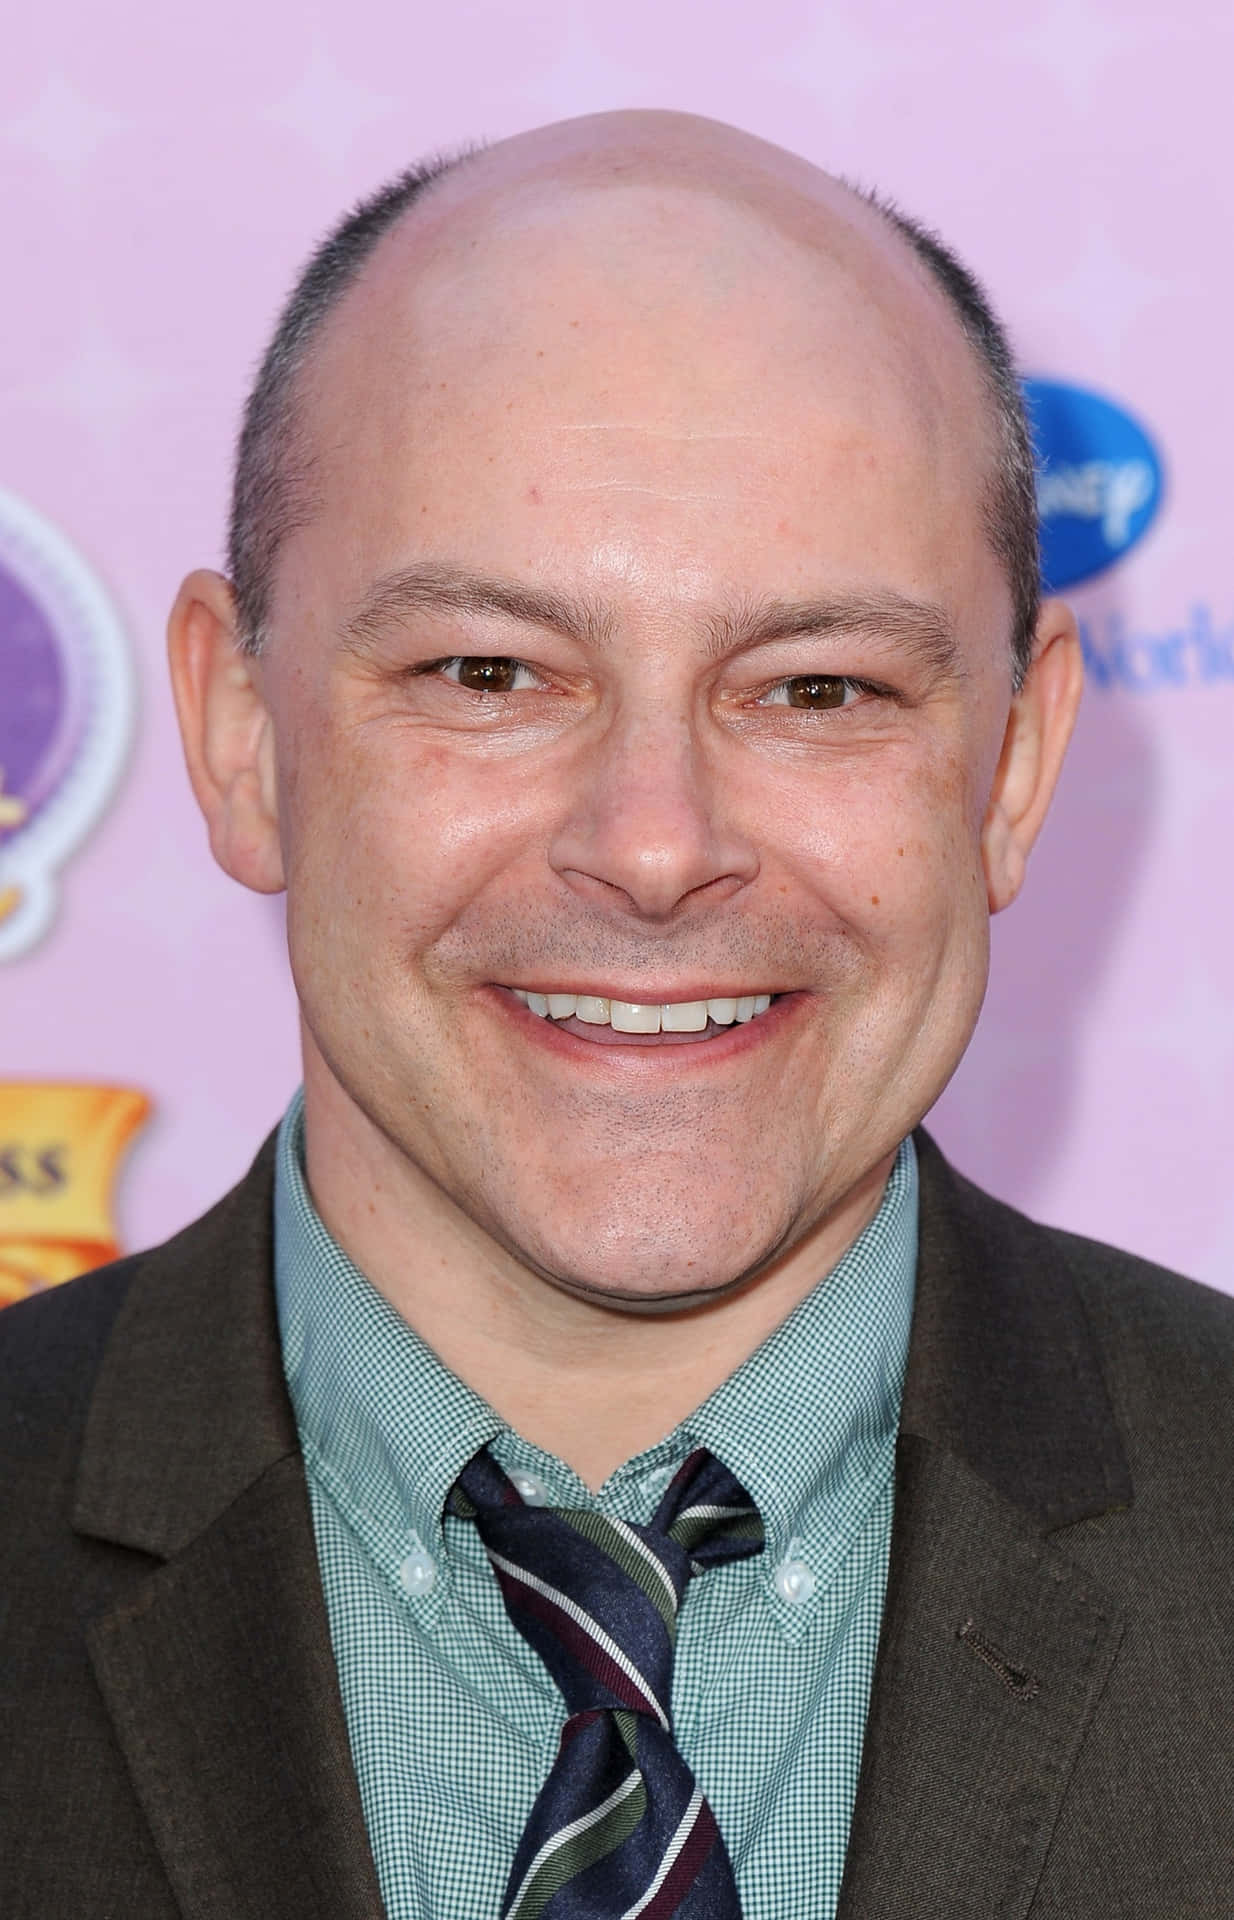 Rob Corddry poses in an ice-blue suit Wallpaper